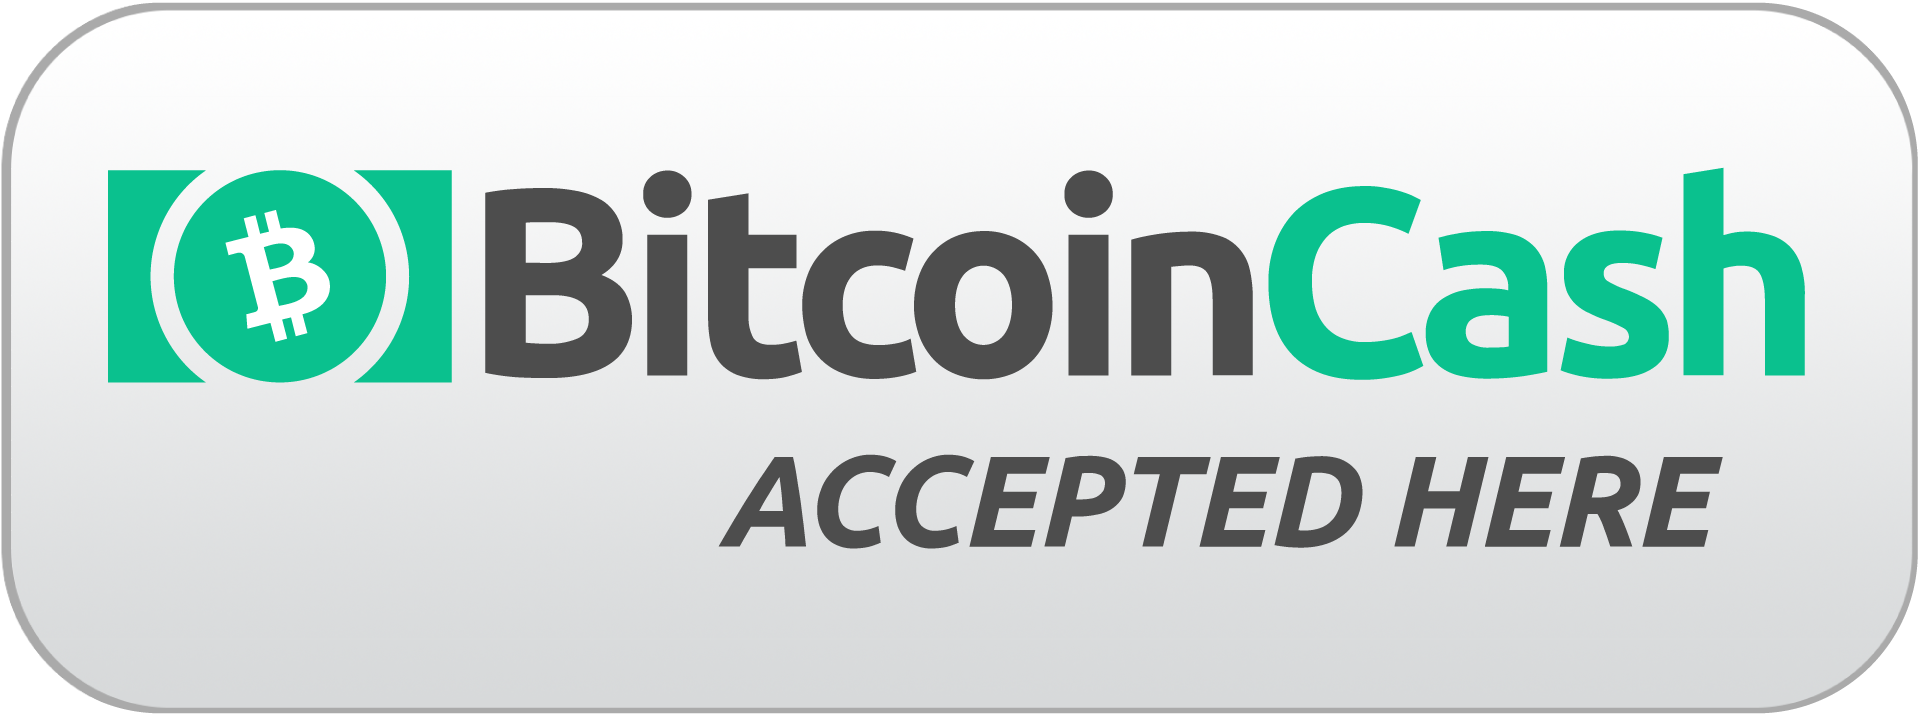 BCH accepted here